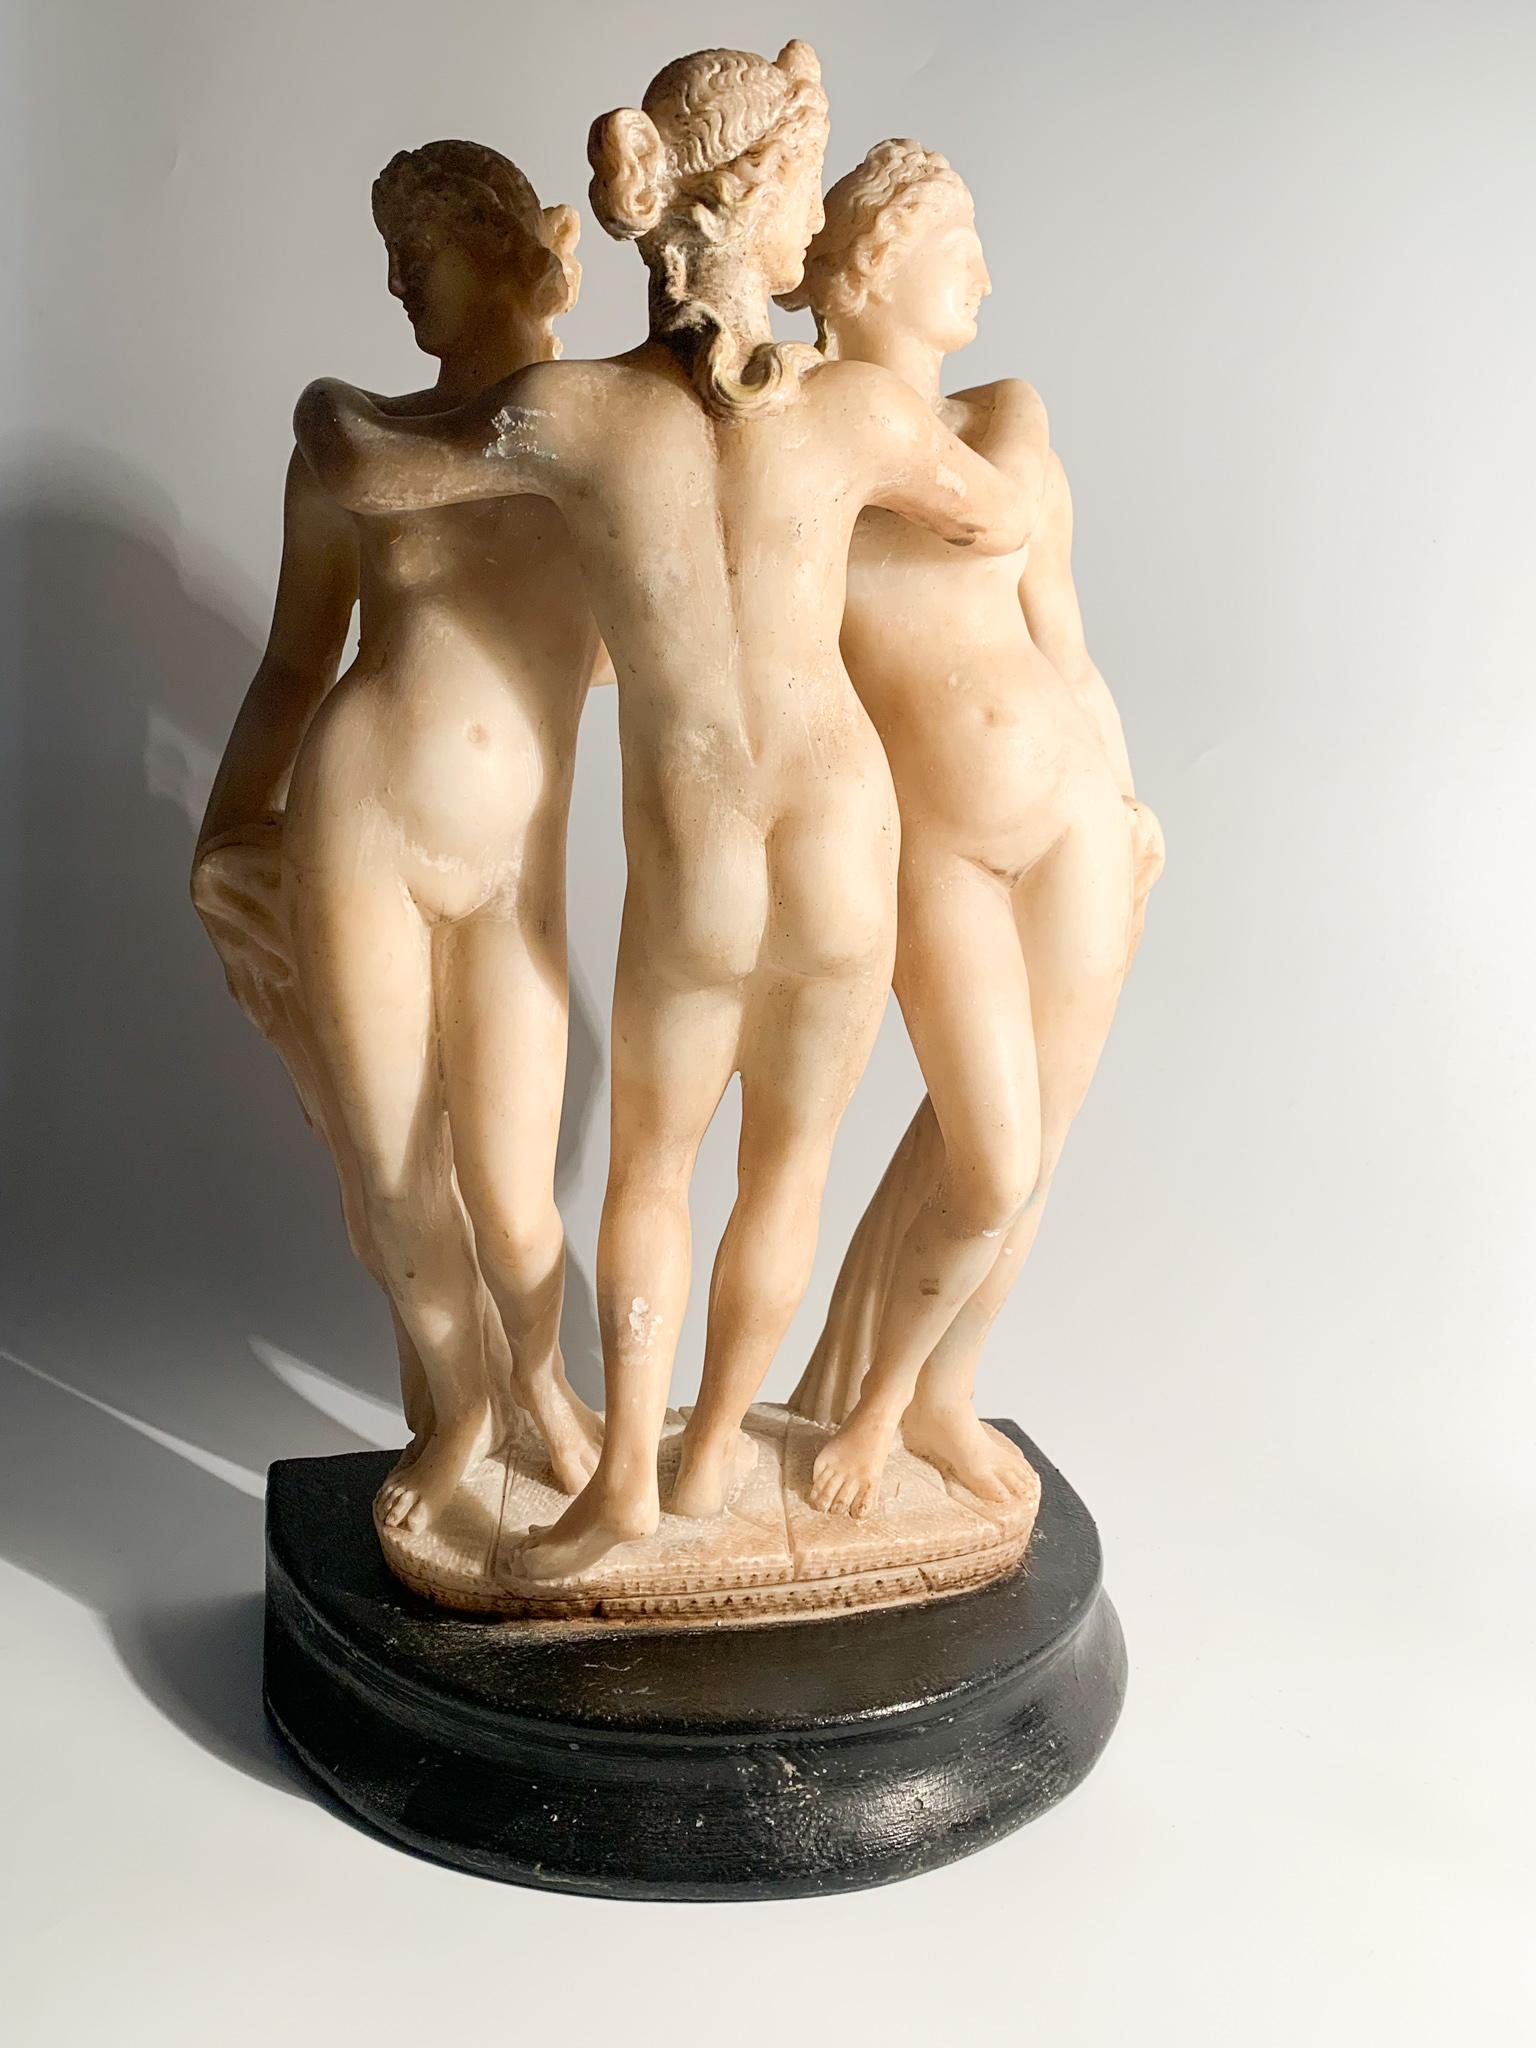 Marble sculpture and wooden base depicting the Three Graces, made in the 1940s

Measures : Ø cm 4 Ø cm 19 h cm 22.